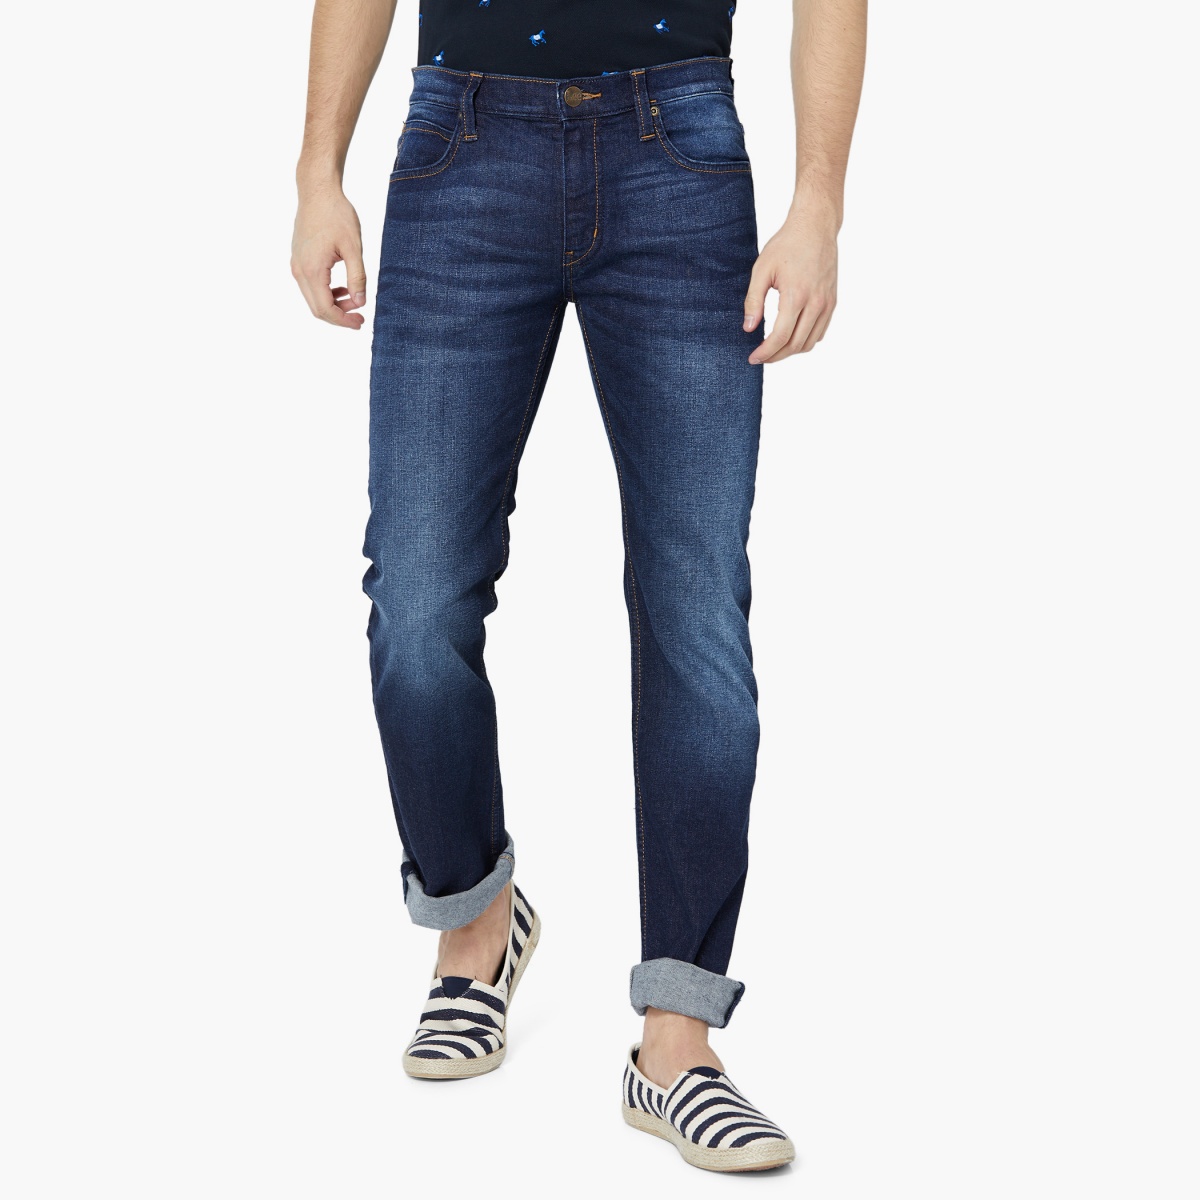 LEE Stonewashed Low Rise Slim Fit Jeans